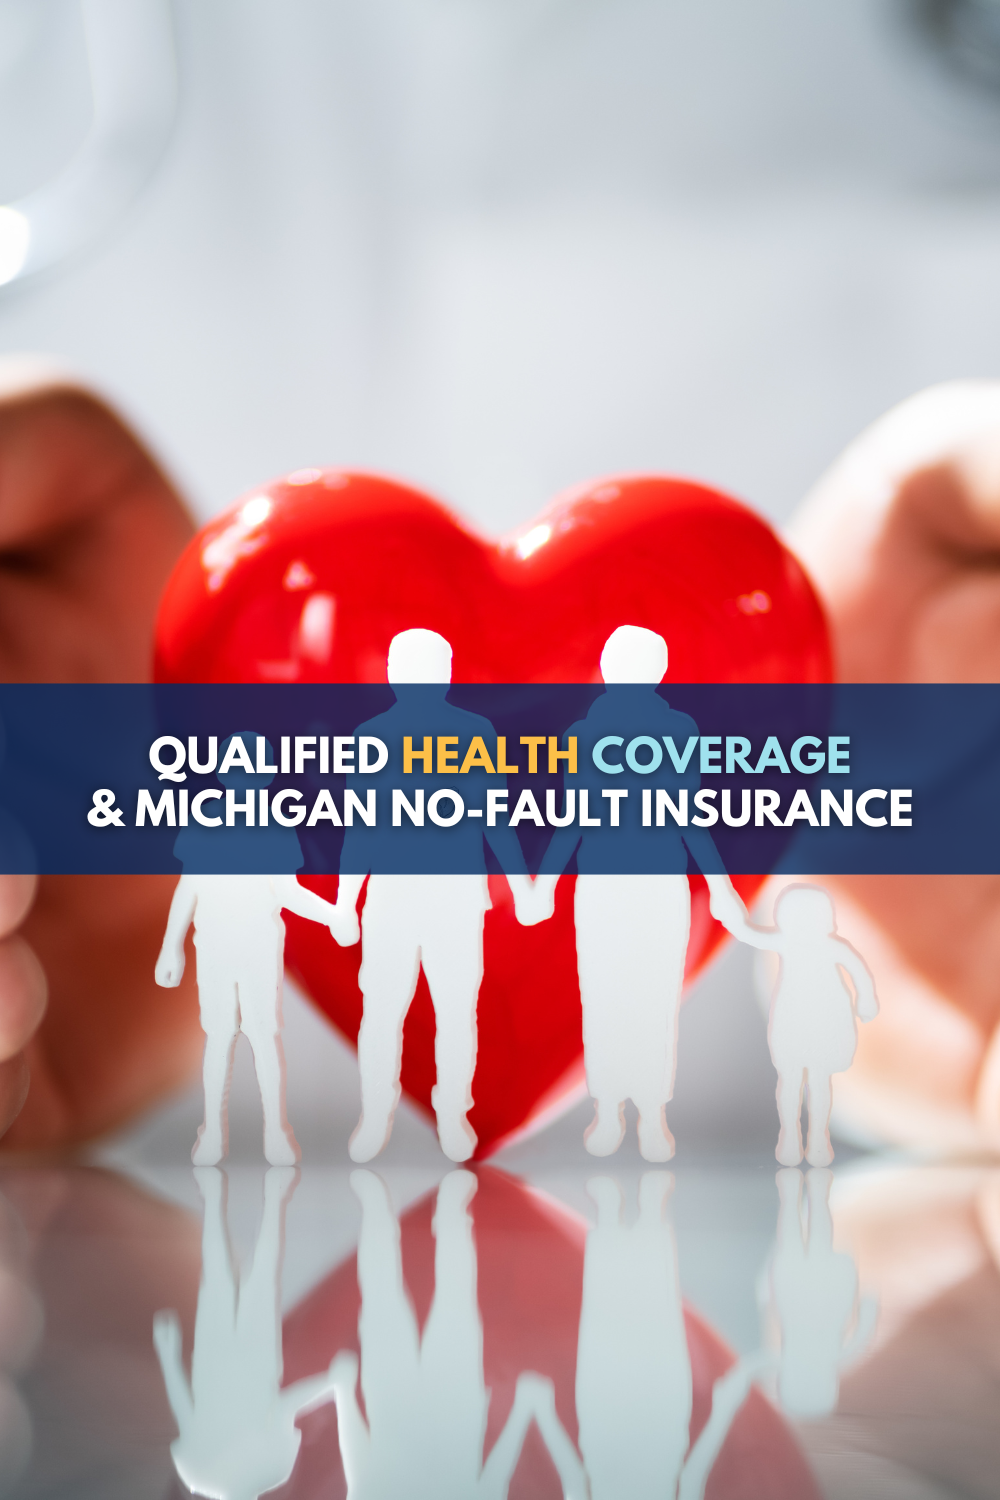 Qualified Health Coverage (QHC) & Michigan No-Fault Insurance: What You Need To Know